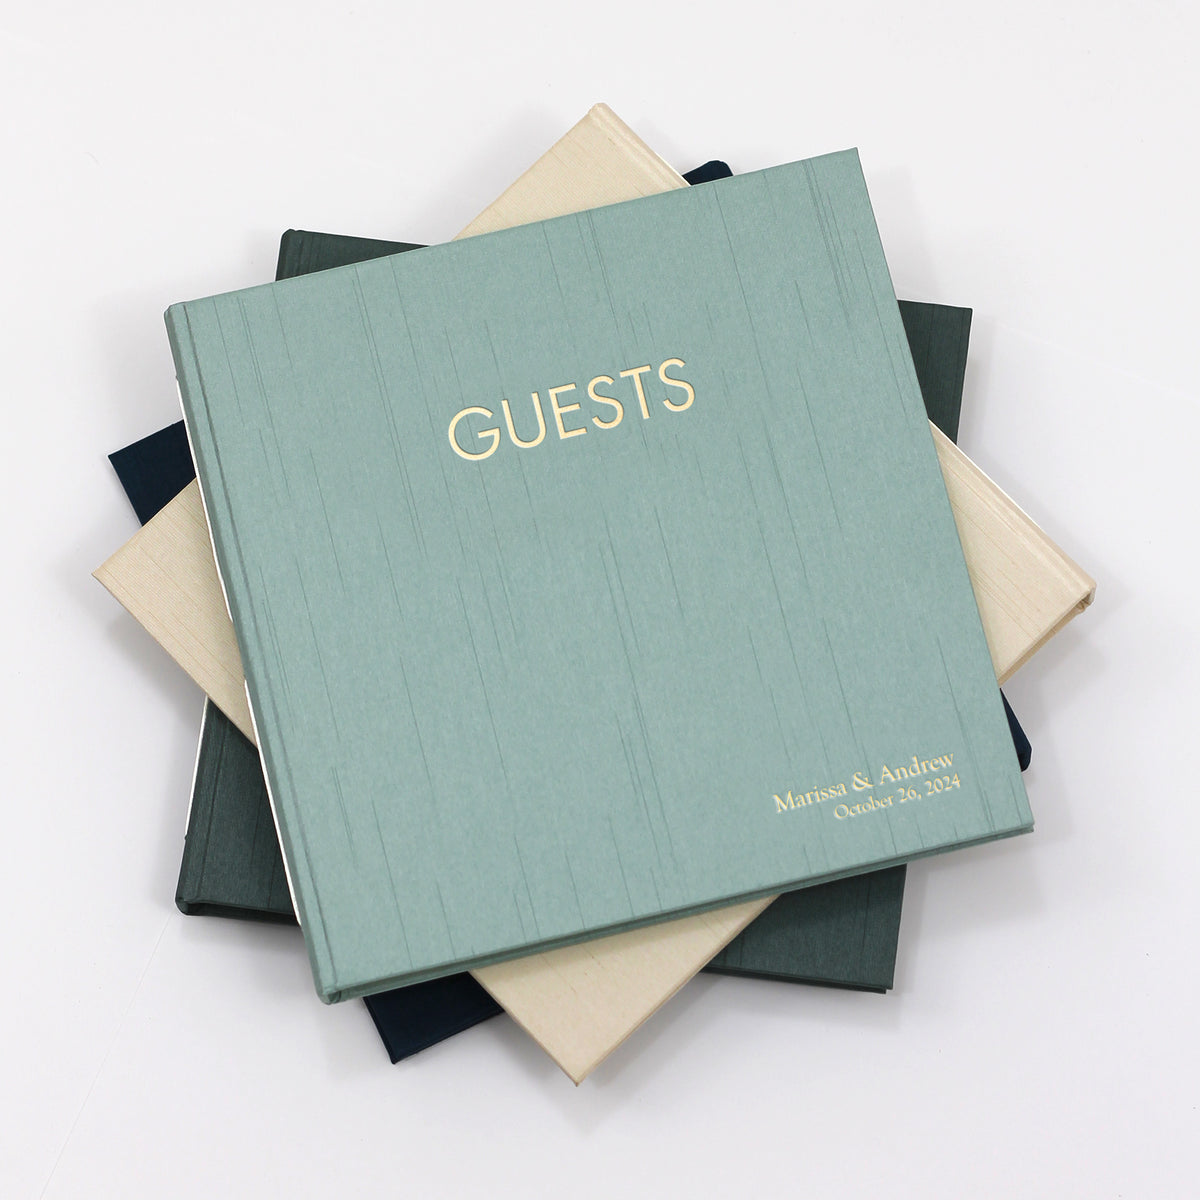 Event Guestbook Embossed with “Guests” | Cover: Blush Pink Silk | Available Personalized